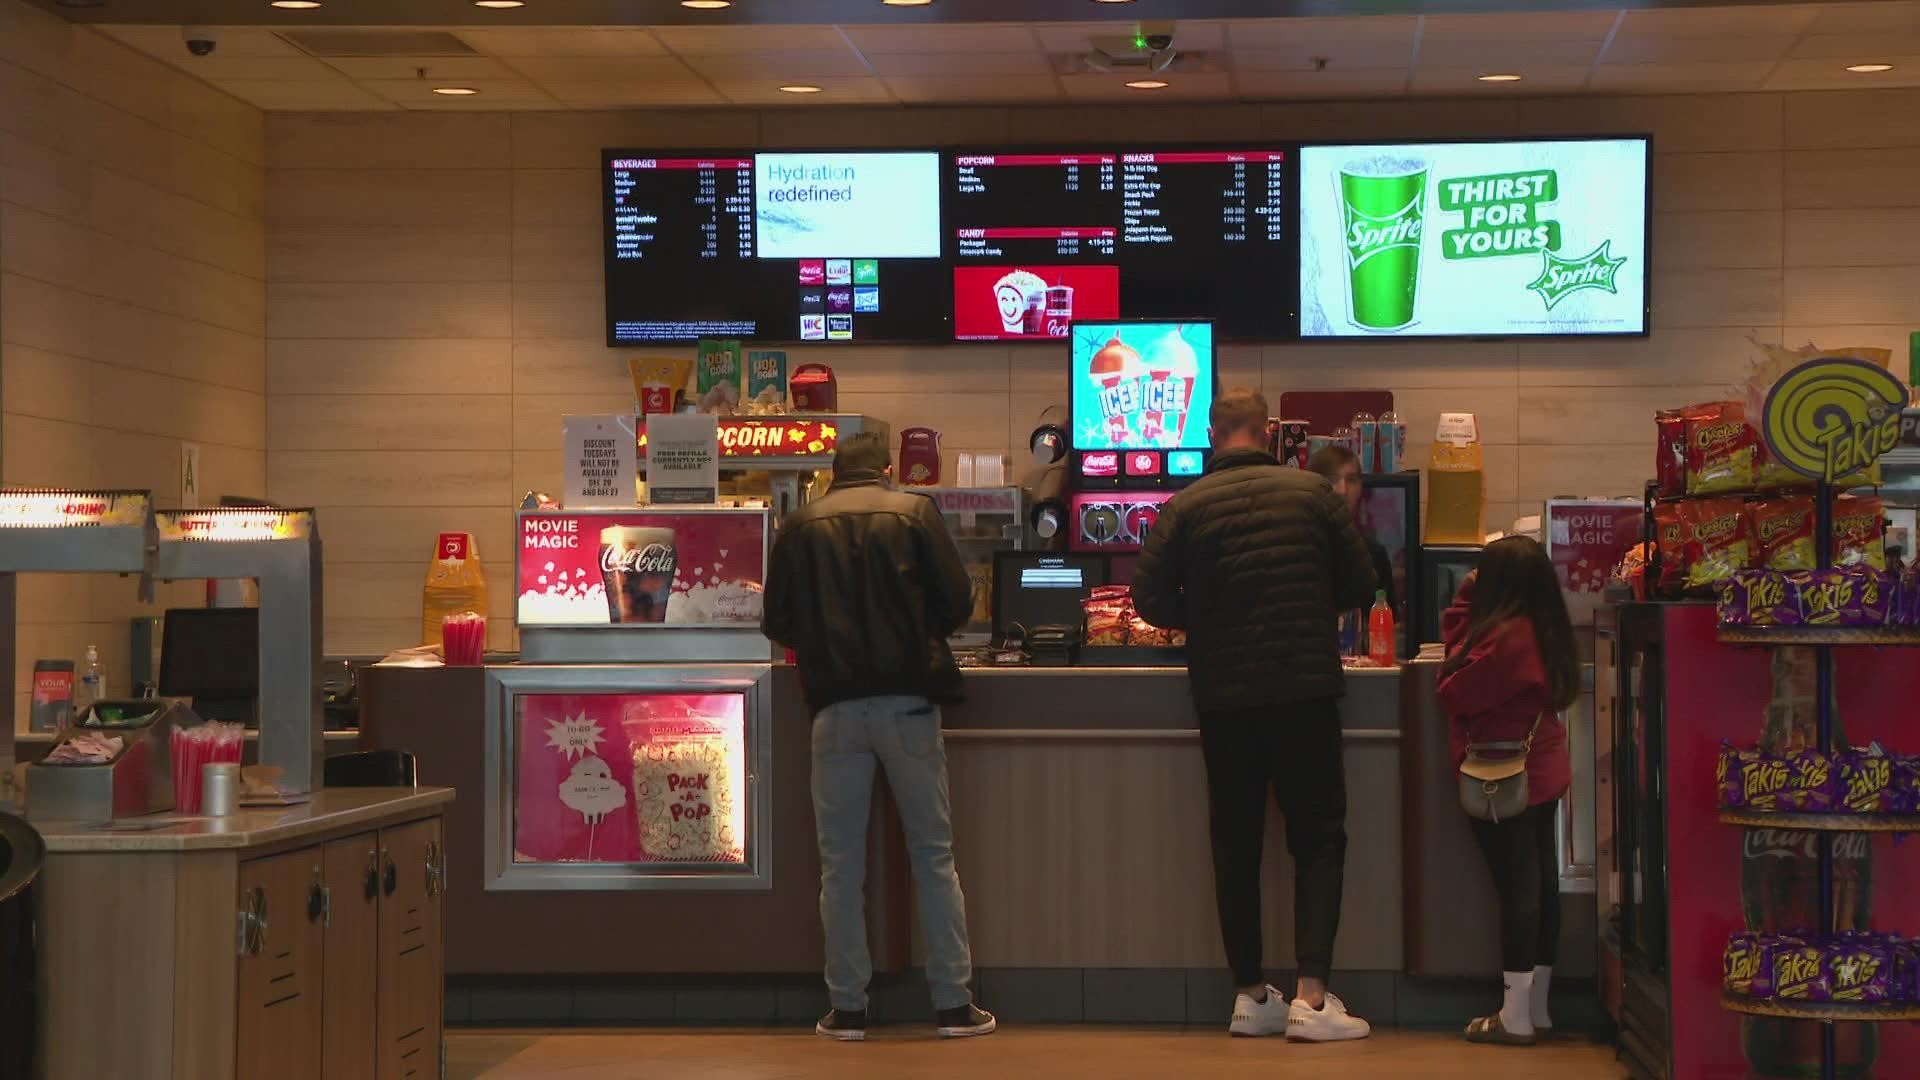 Moviegoers WHAS11 spoke to said holidays are meant to be spent with loved ones, no matter where they are.